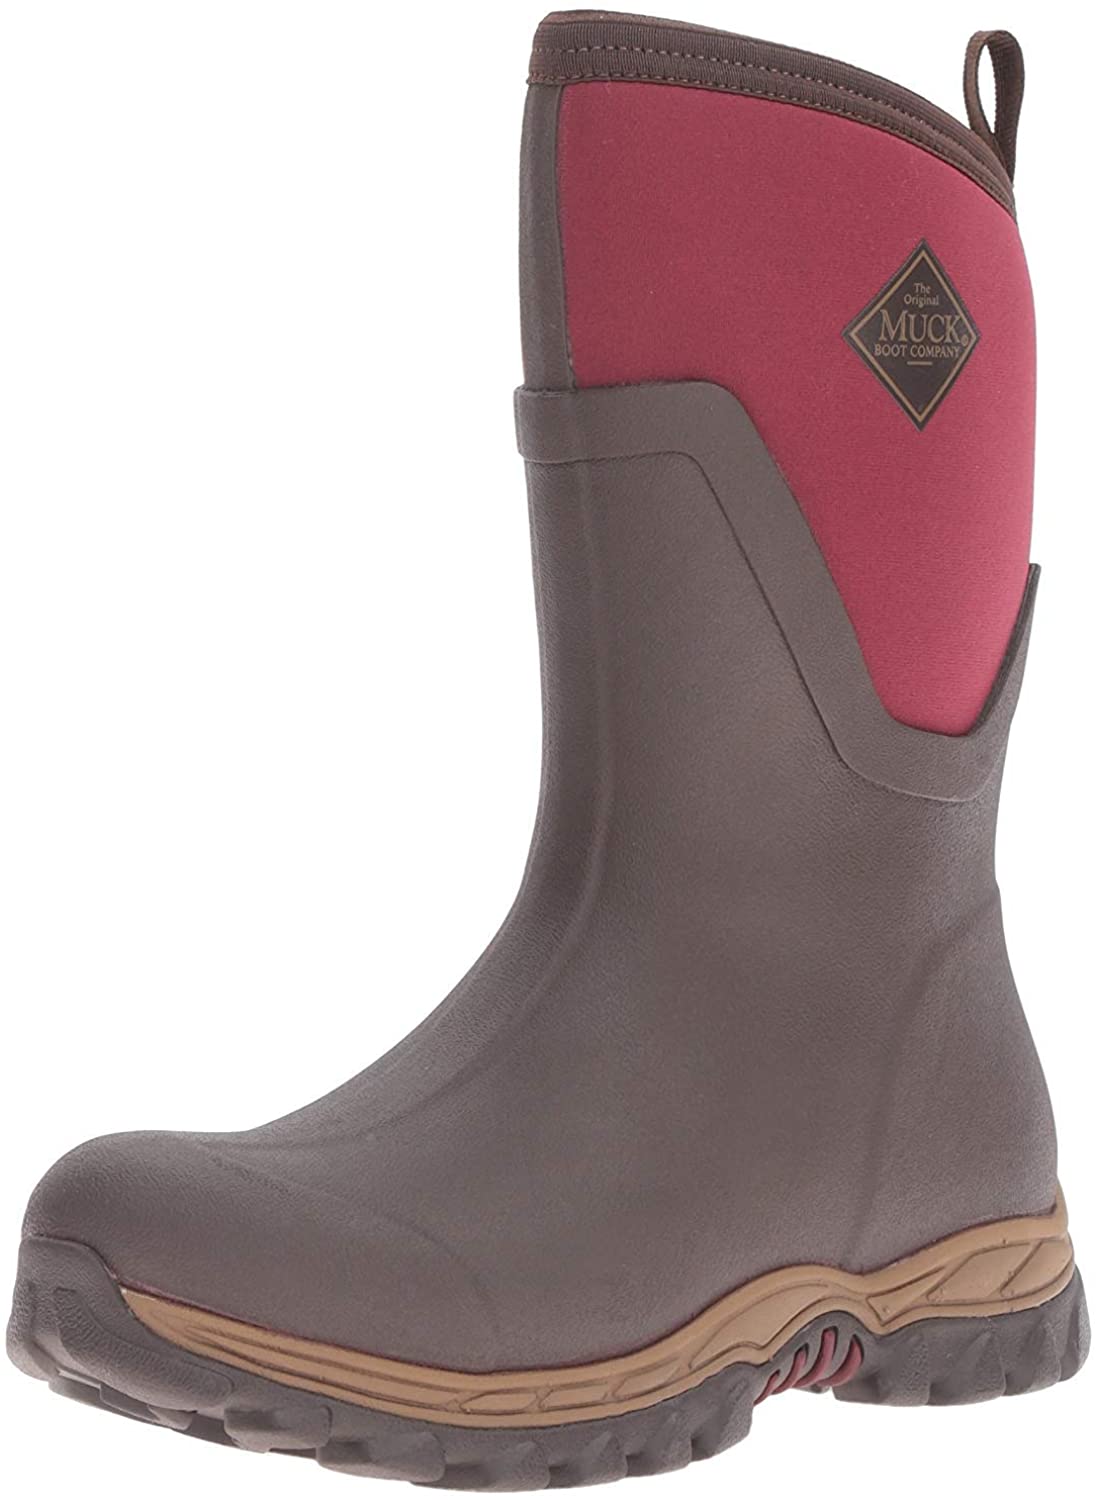 Muck Boot Arctic Sport Ll Extreme Conditions Mid-Height Rubber Womens Winter Boot 